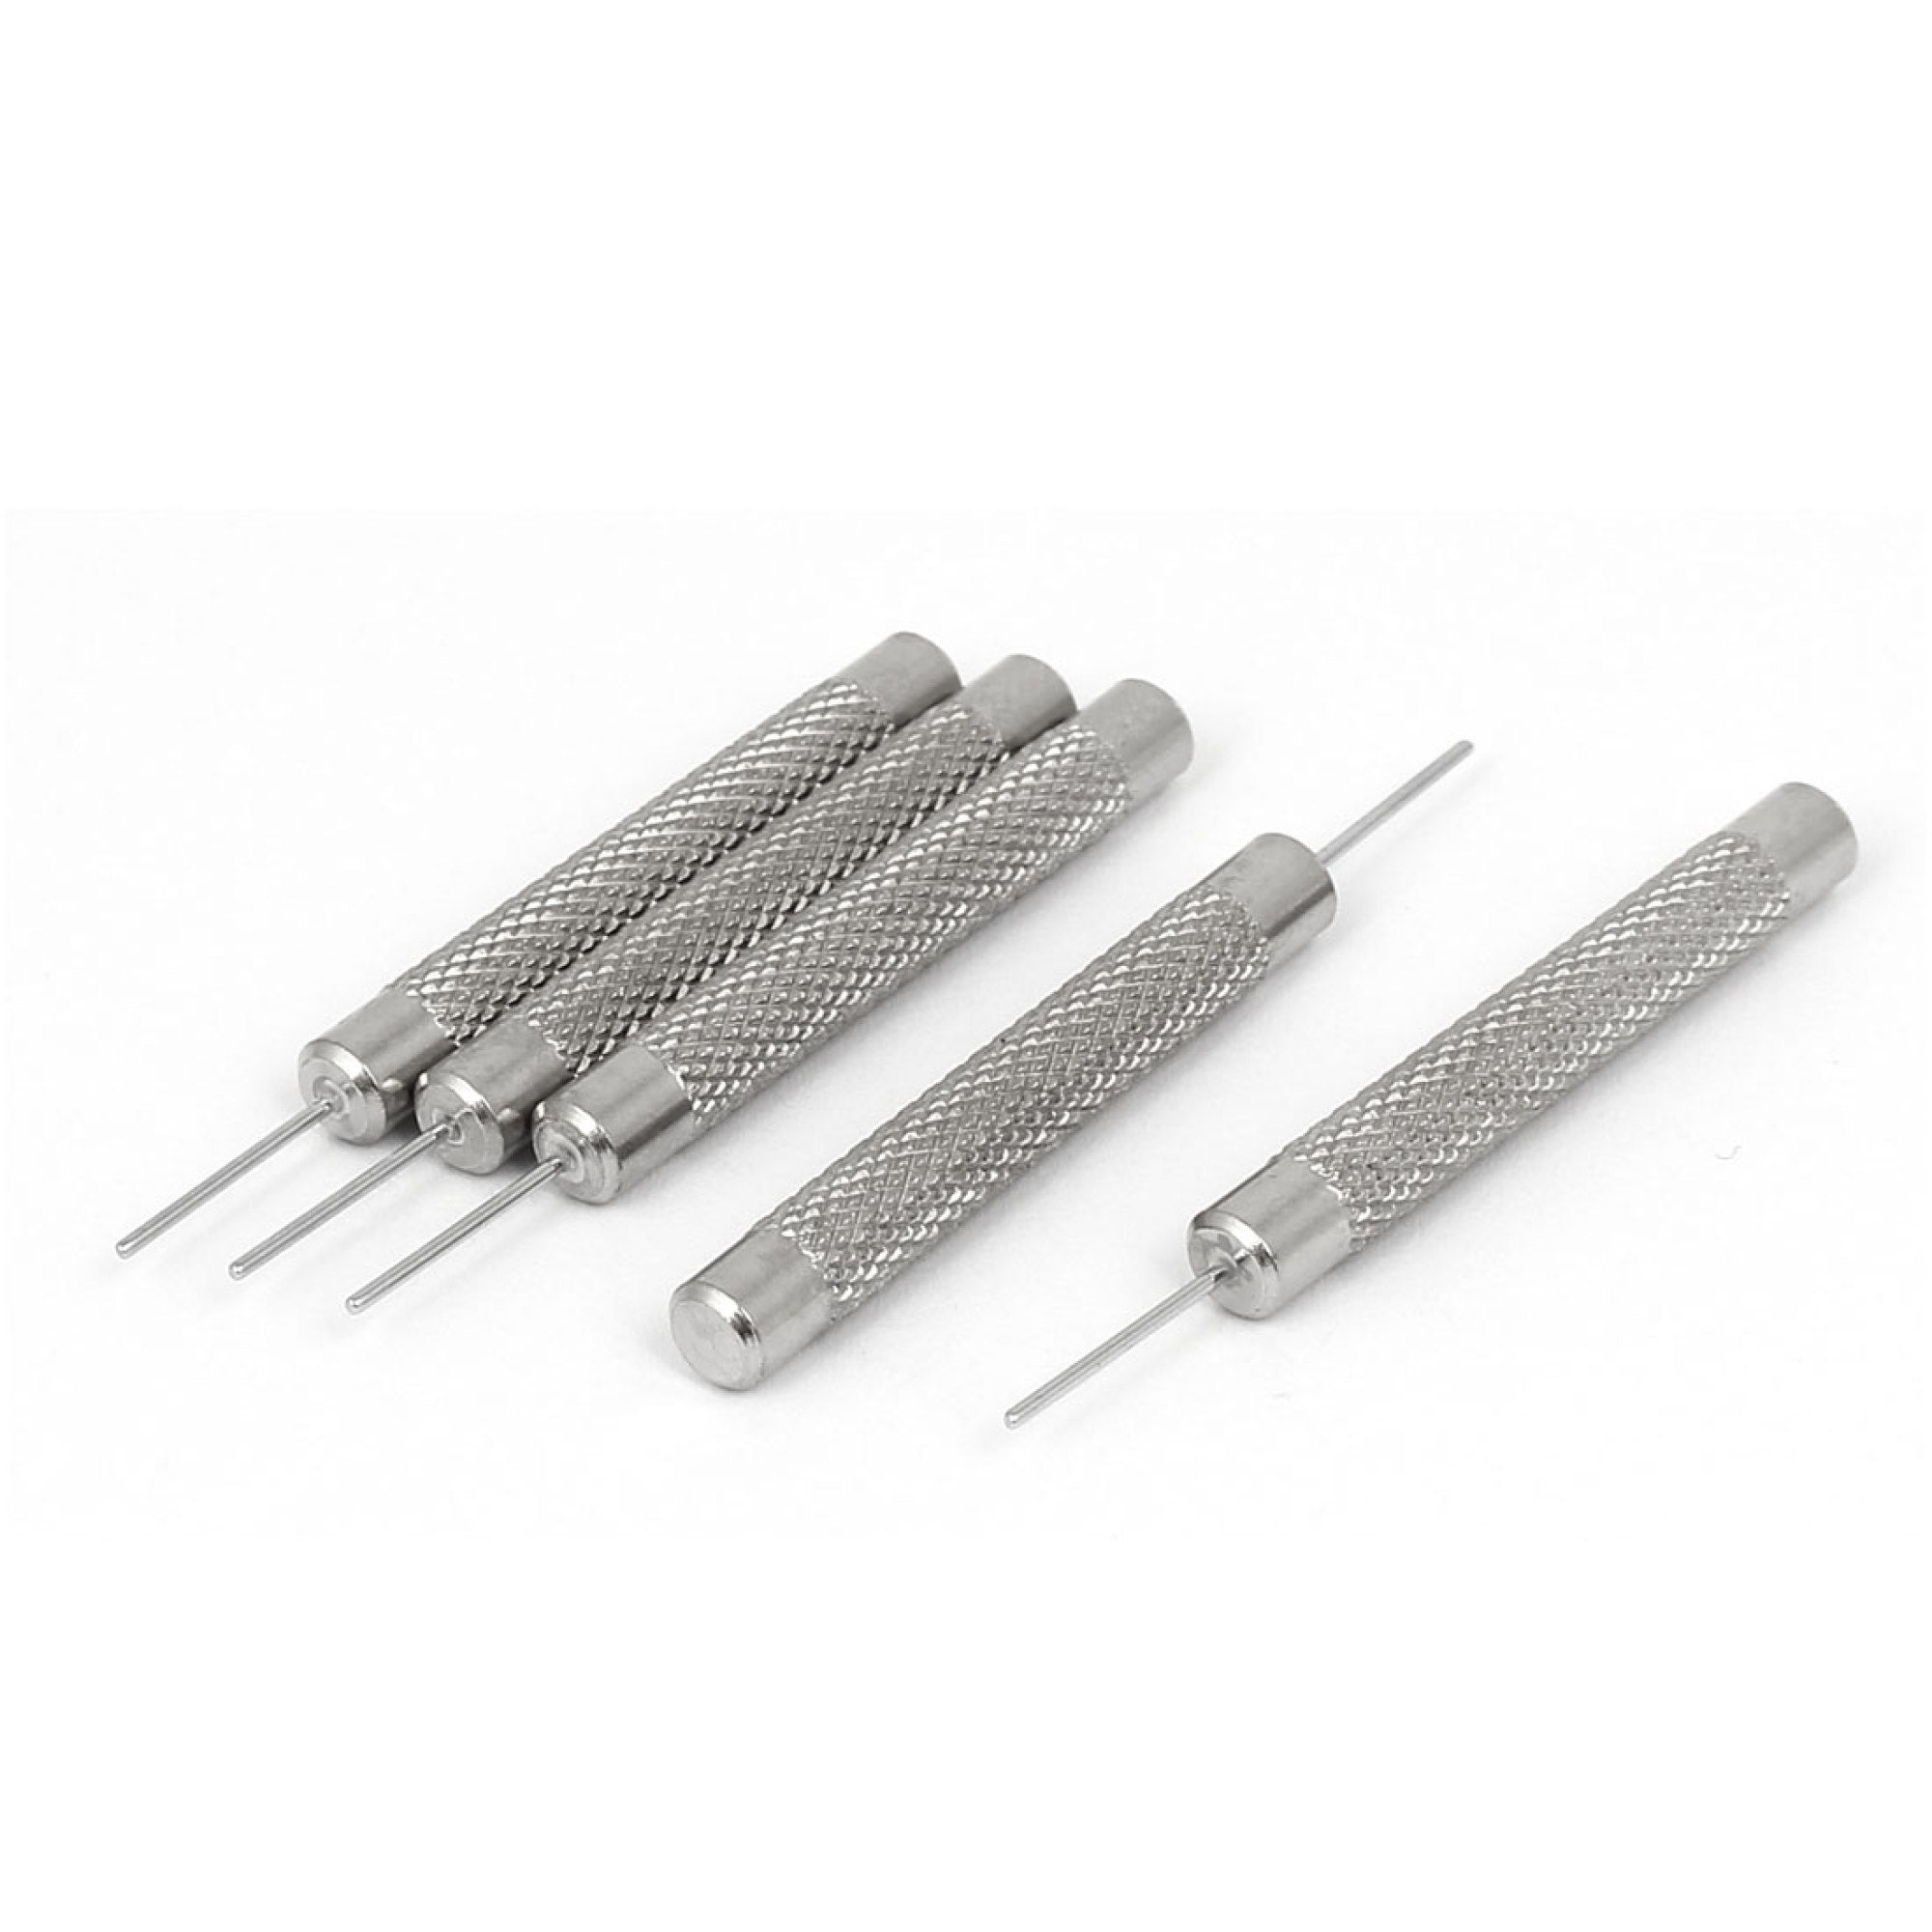 0.8mm Dia Tip Watch Band Strap Link Pin Remover 5pcs